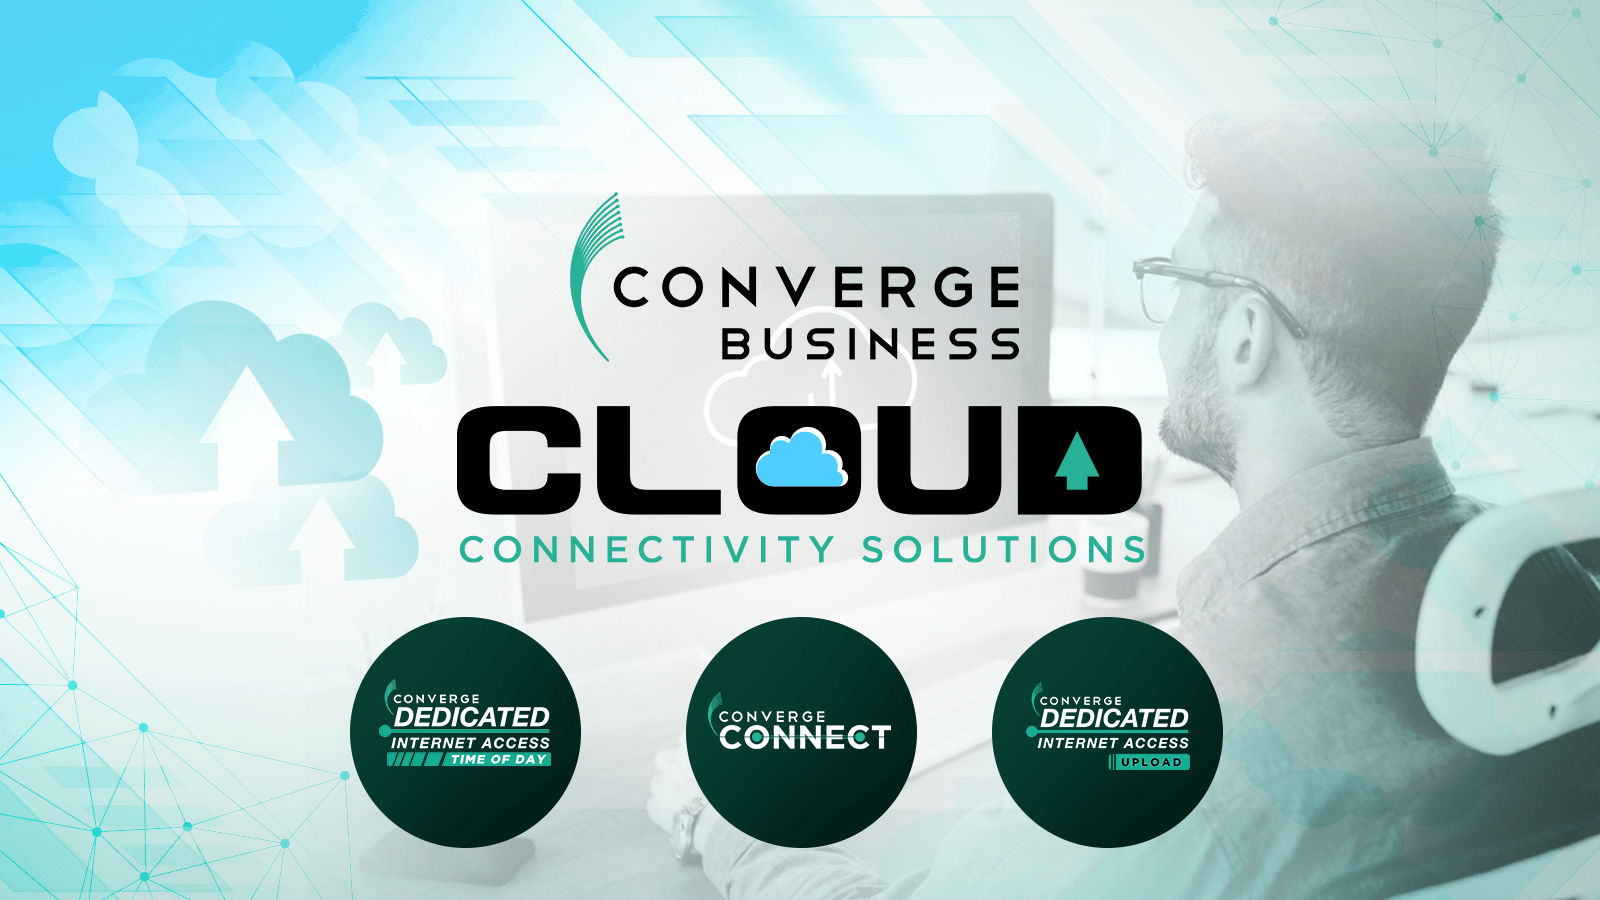 Converge offers cloud services to businesses